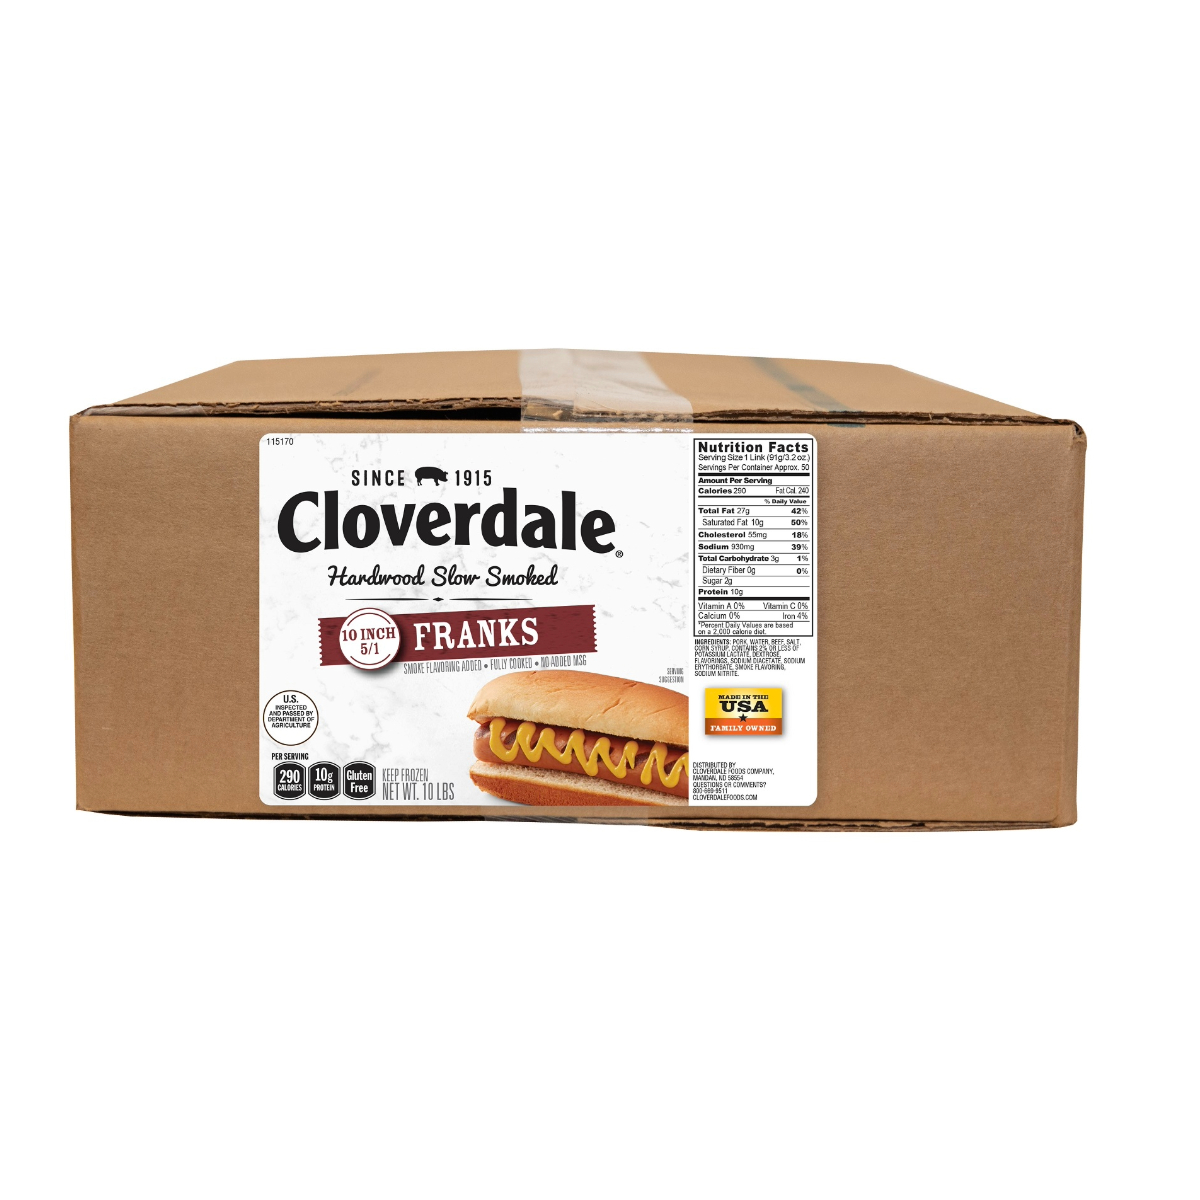 CLOVERDALE MEAT HOT DOGS 10 INCH 5/1 FRANKS